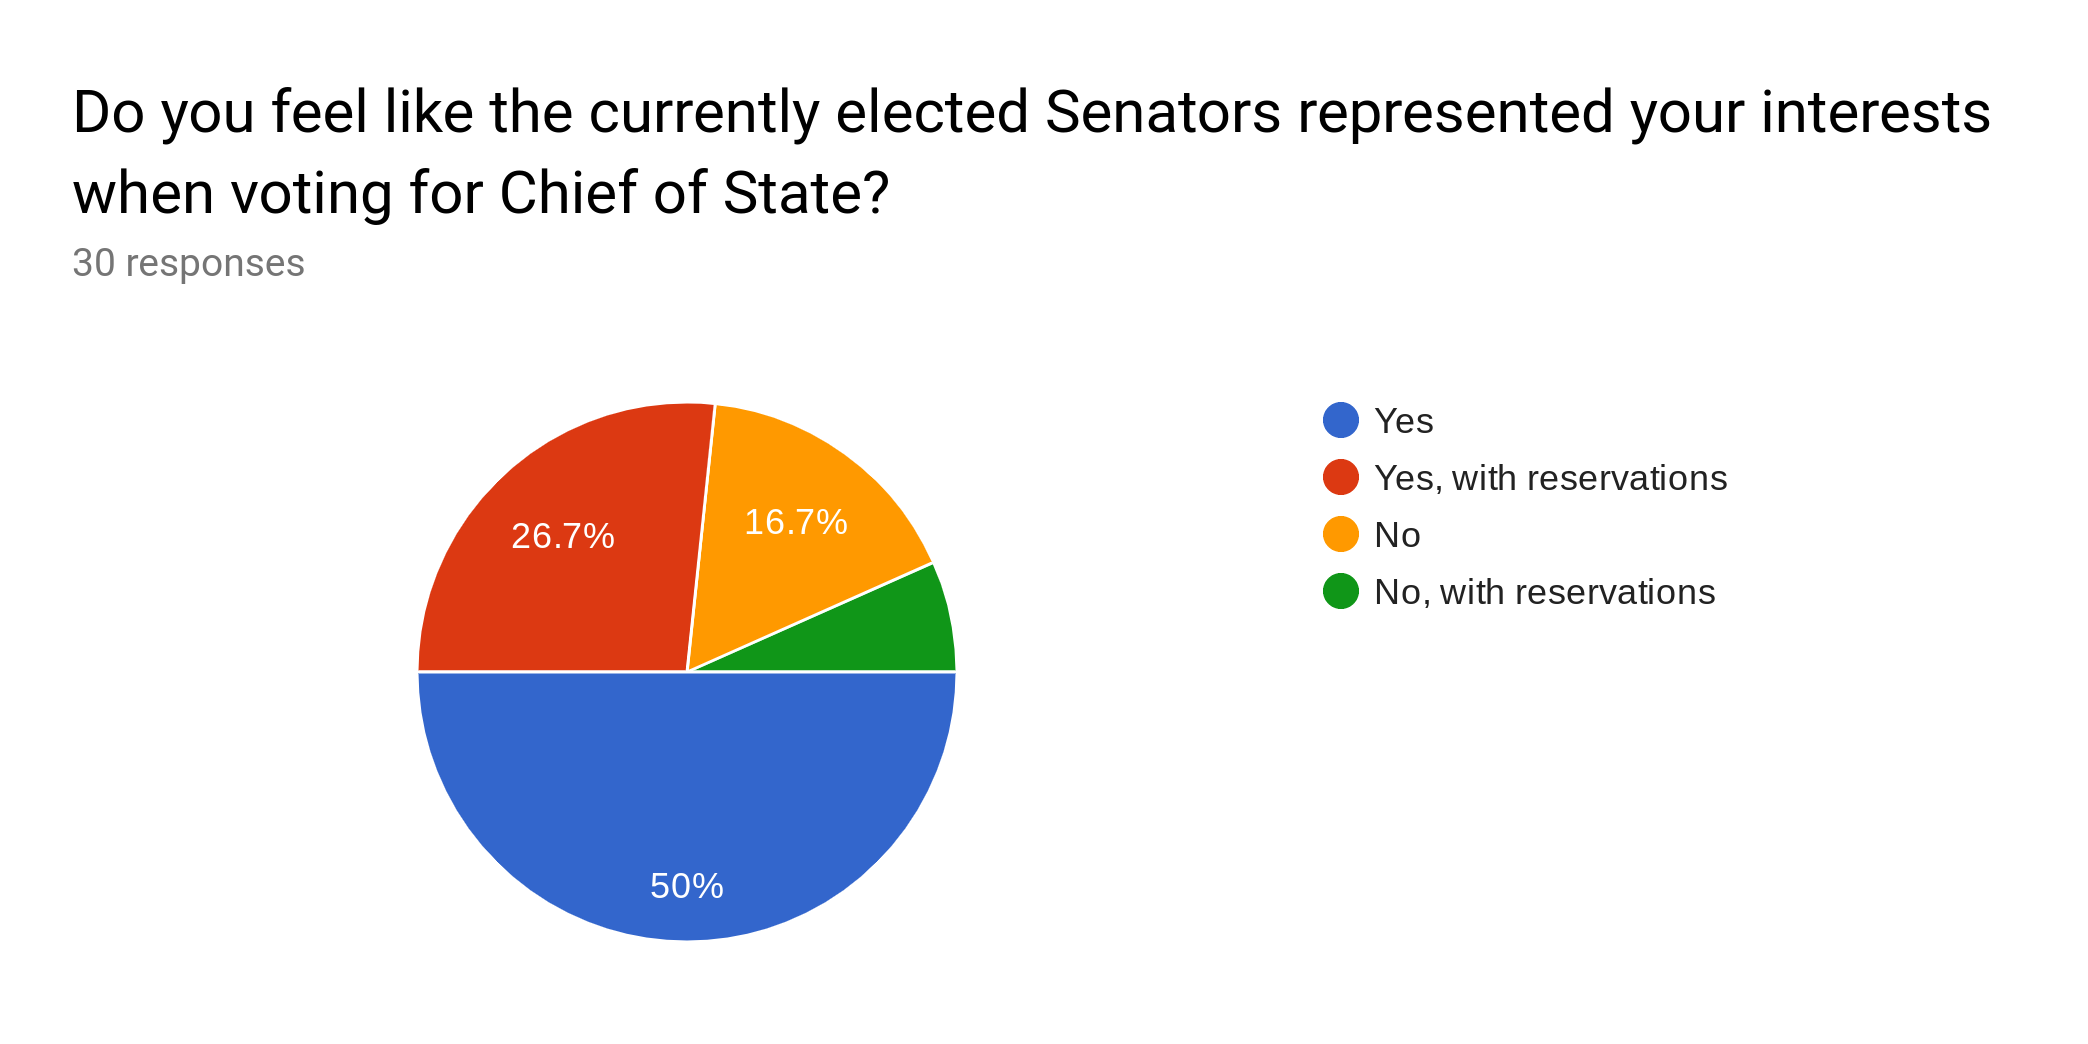 Forms response chart. Question title: Do you feel like the currently elected Senators represented your interests when voting for Chief of State?. Number of responses: 30 responses.